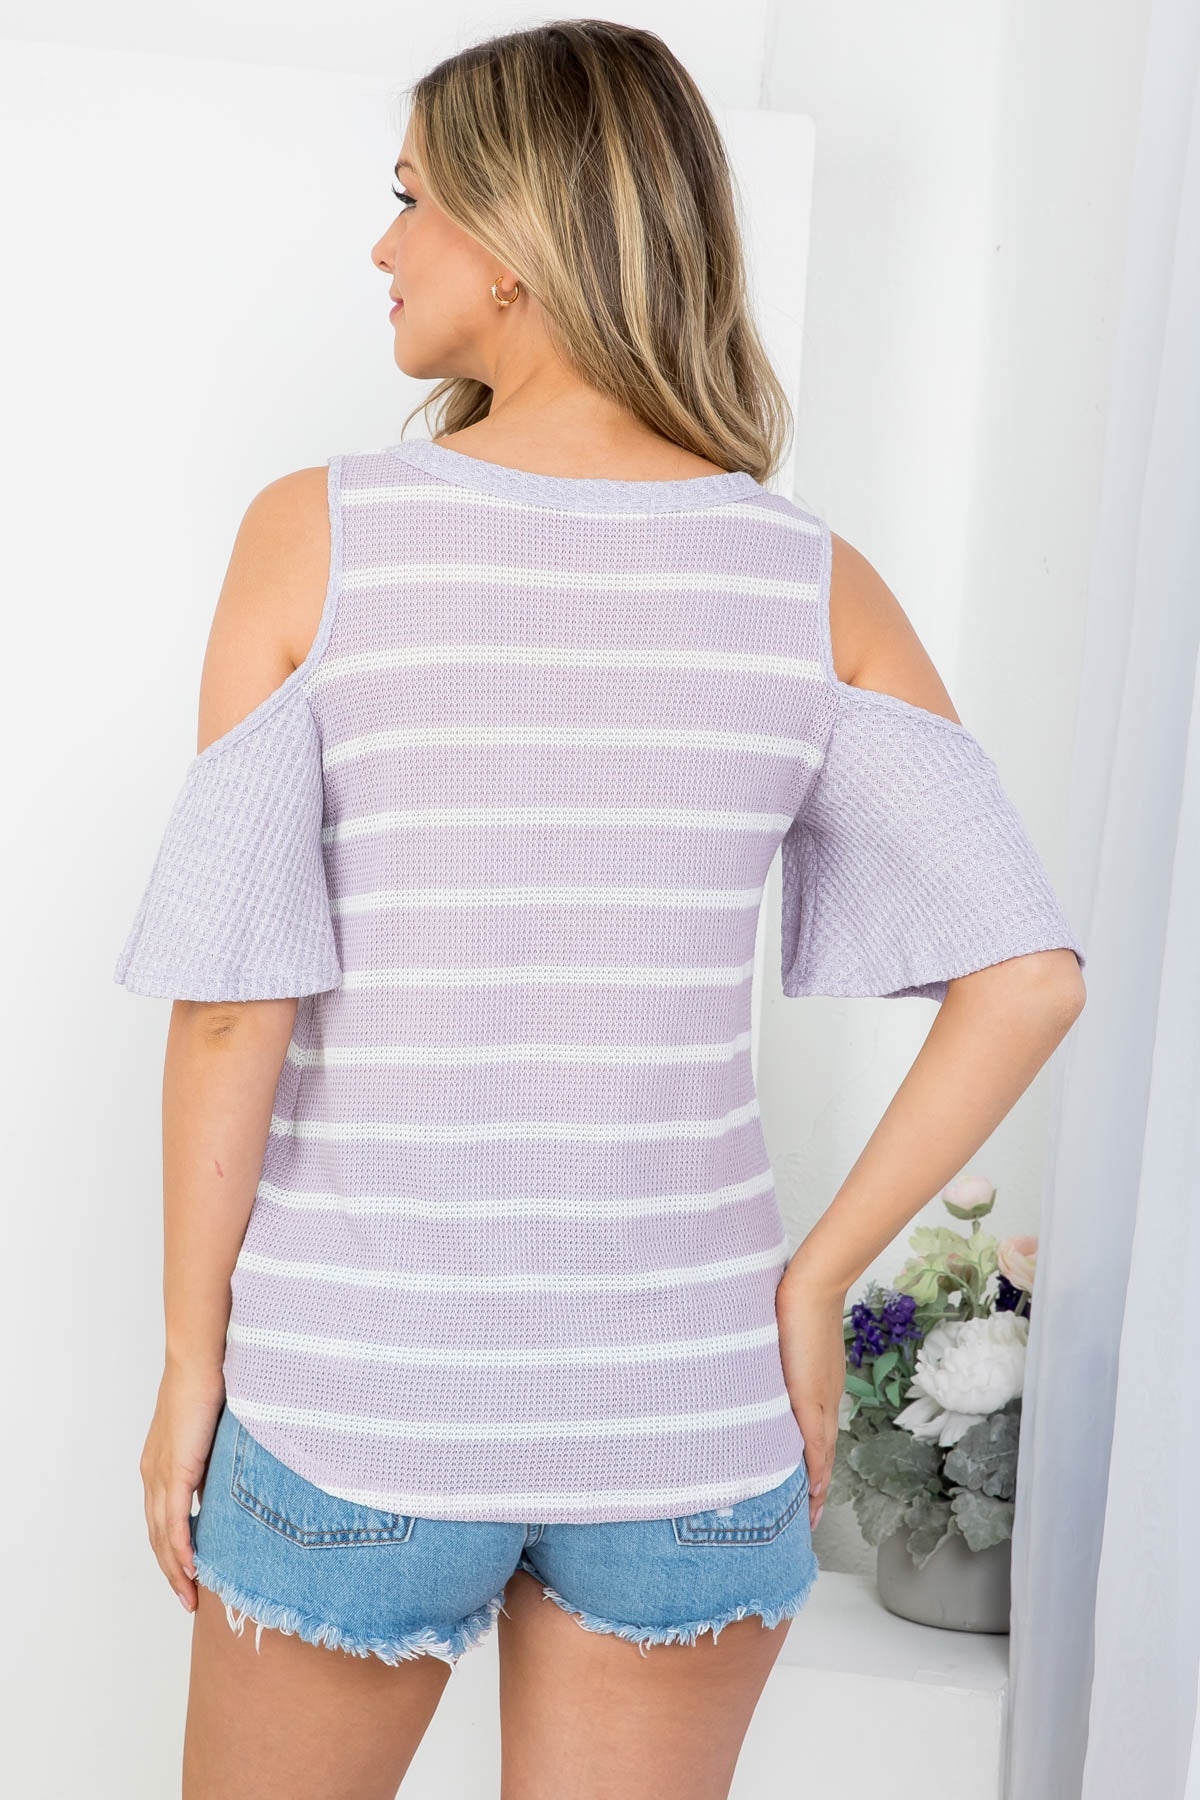 LILAC IVORY STRIPES V-NECKLINE BUTTON DOWN WITH FRONT KNOT TWIST COLD SHOULDER TOP